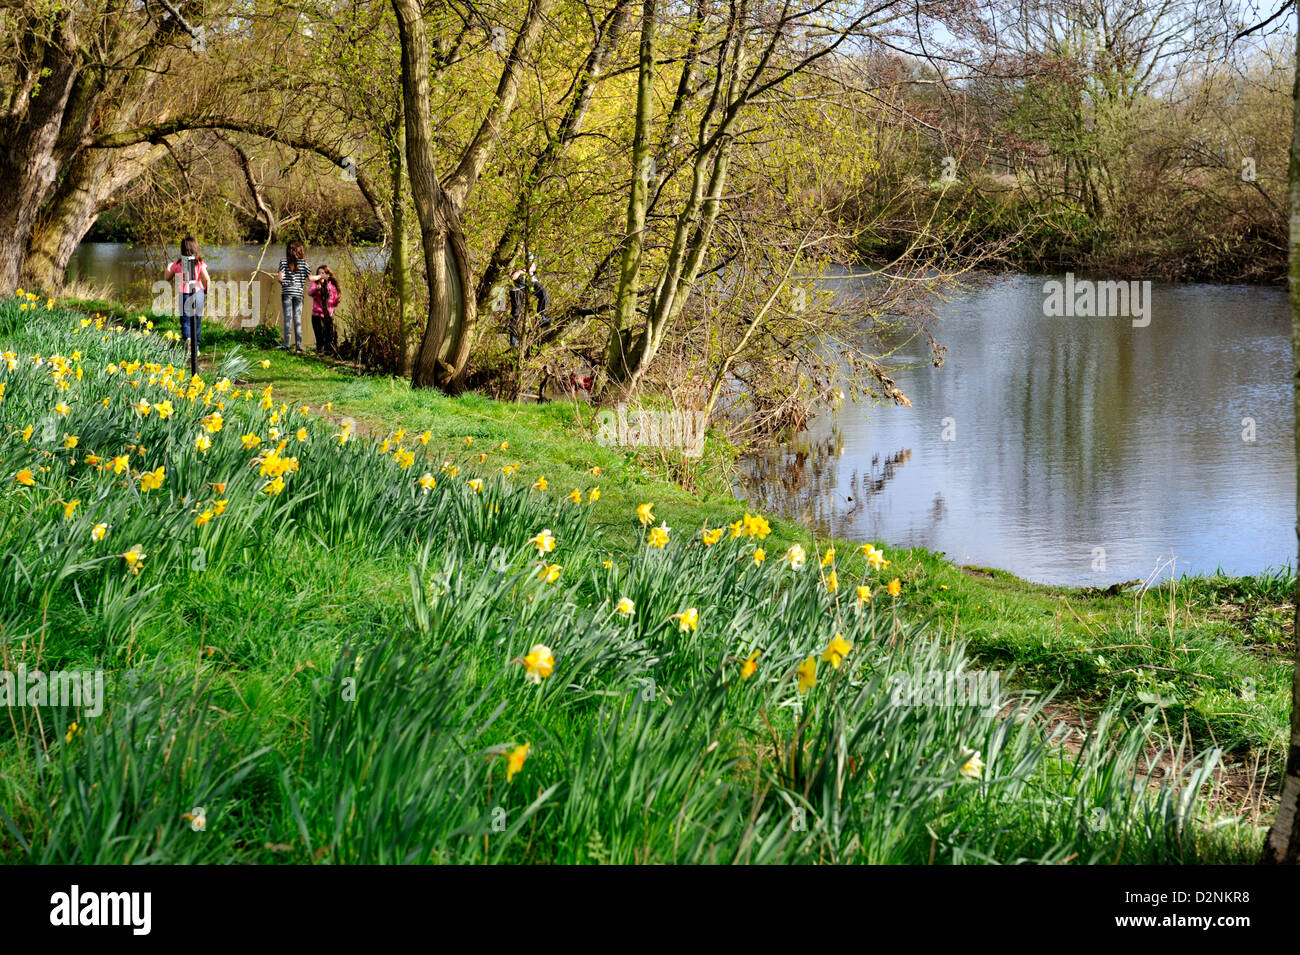 Children playing on river bank in spring Stock Photo